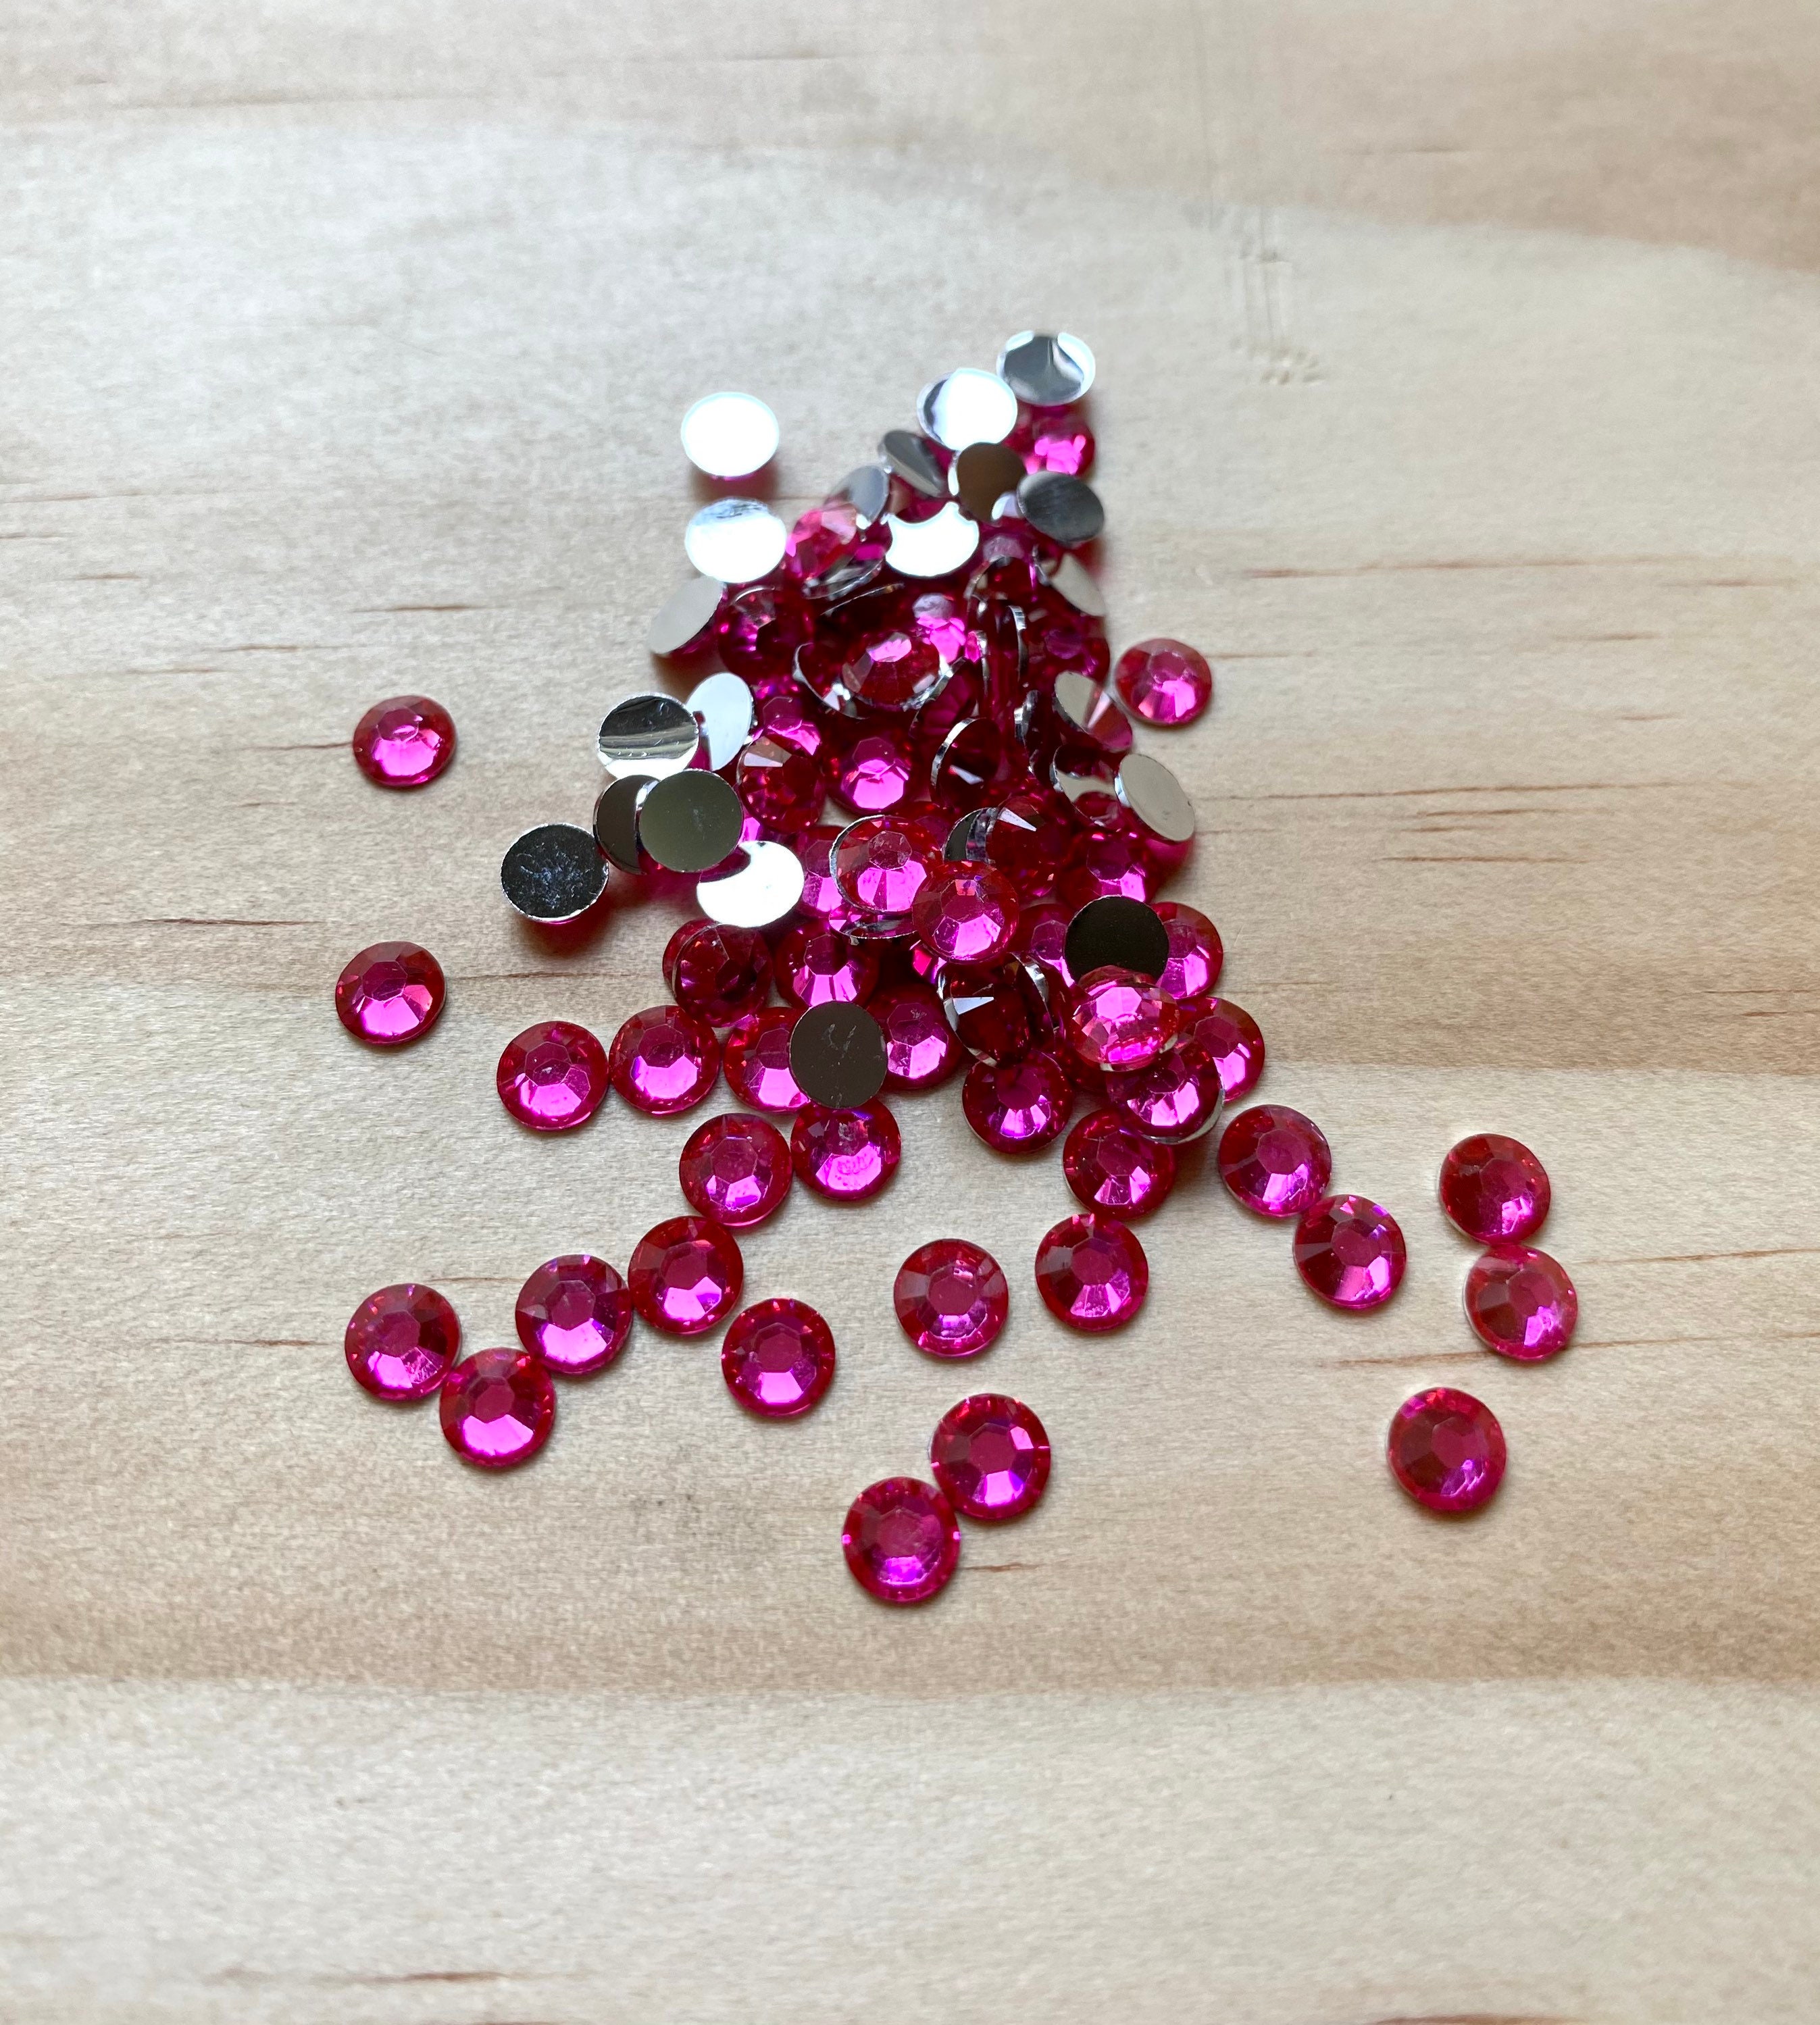 Copper rose Gold Jelly-non-hot Fix Resin  Rhinestones-bling-2mm-3mm-4mm-5mm-6mm-mixed 2m,3m,4m,5m500/1000/3000pcs 